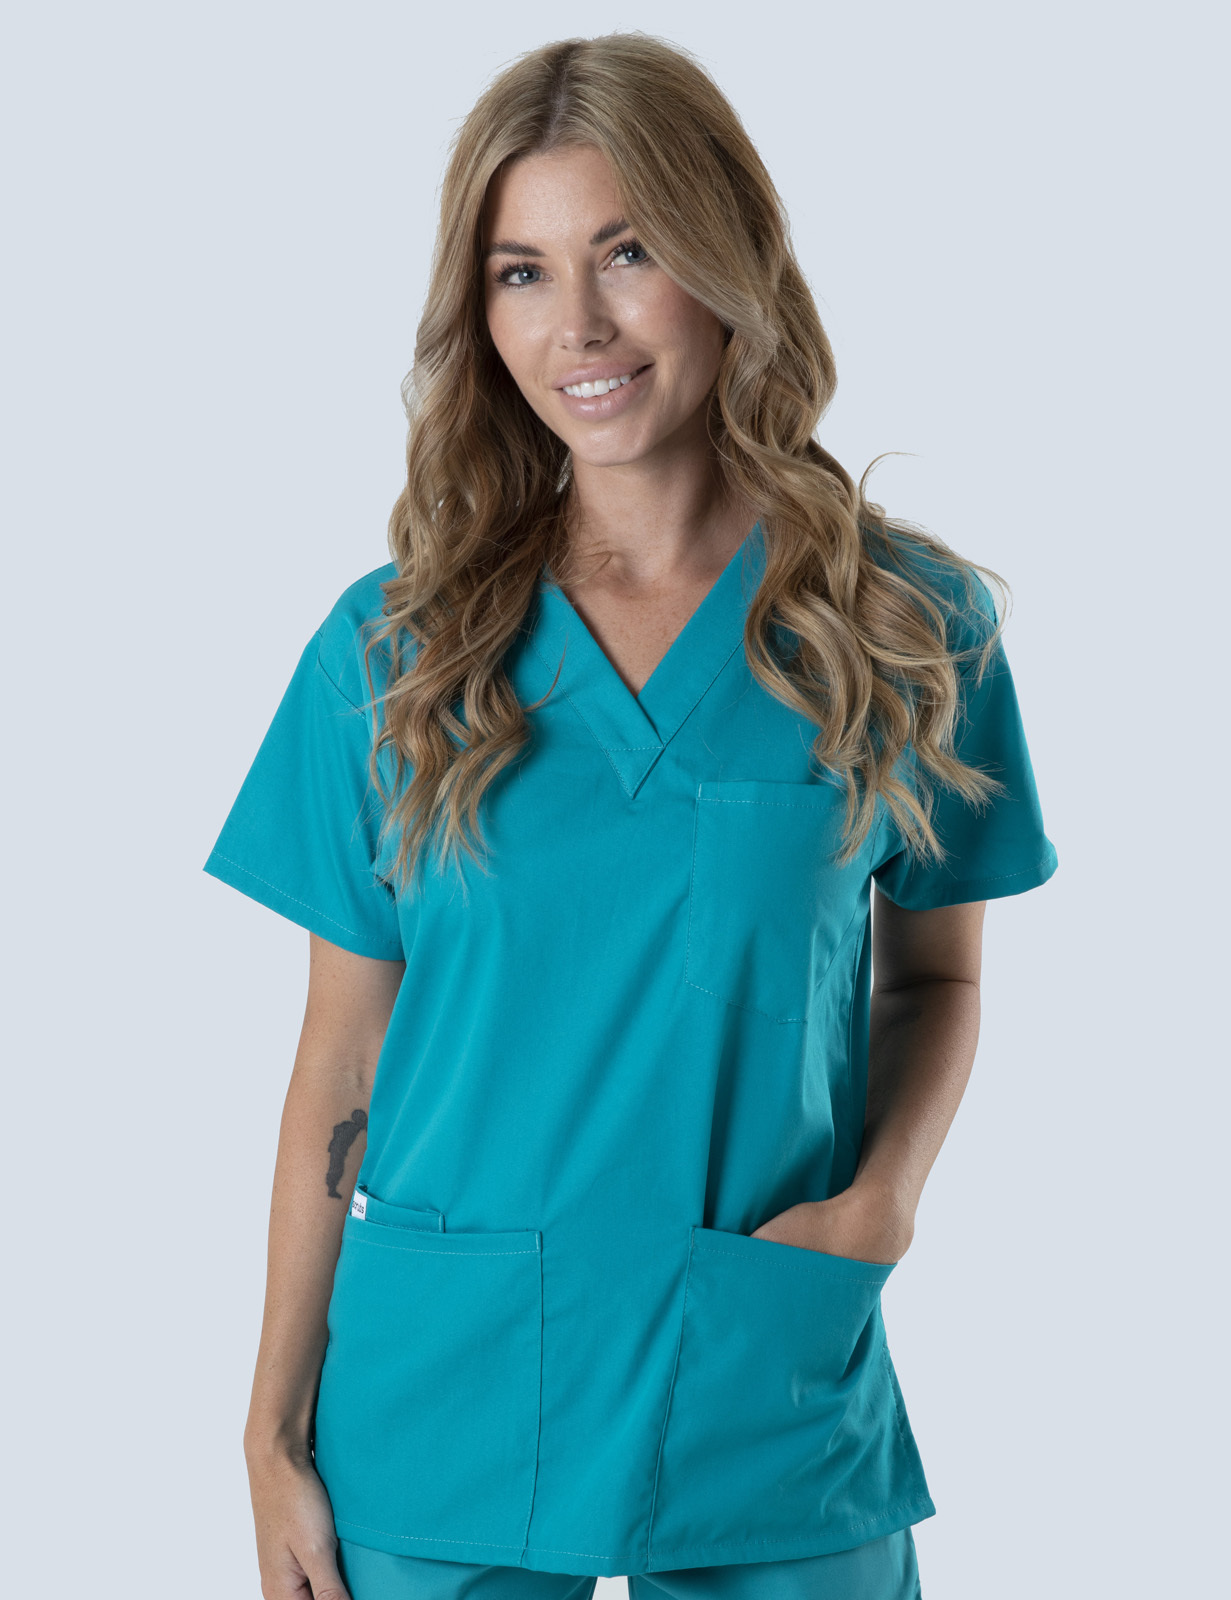 Canberra Hospital - Intensive Care Unit (4 Pocket Scrub Top in Teal incl Logo)